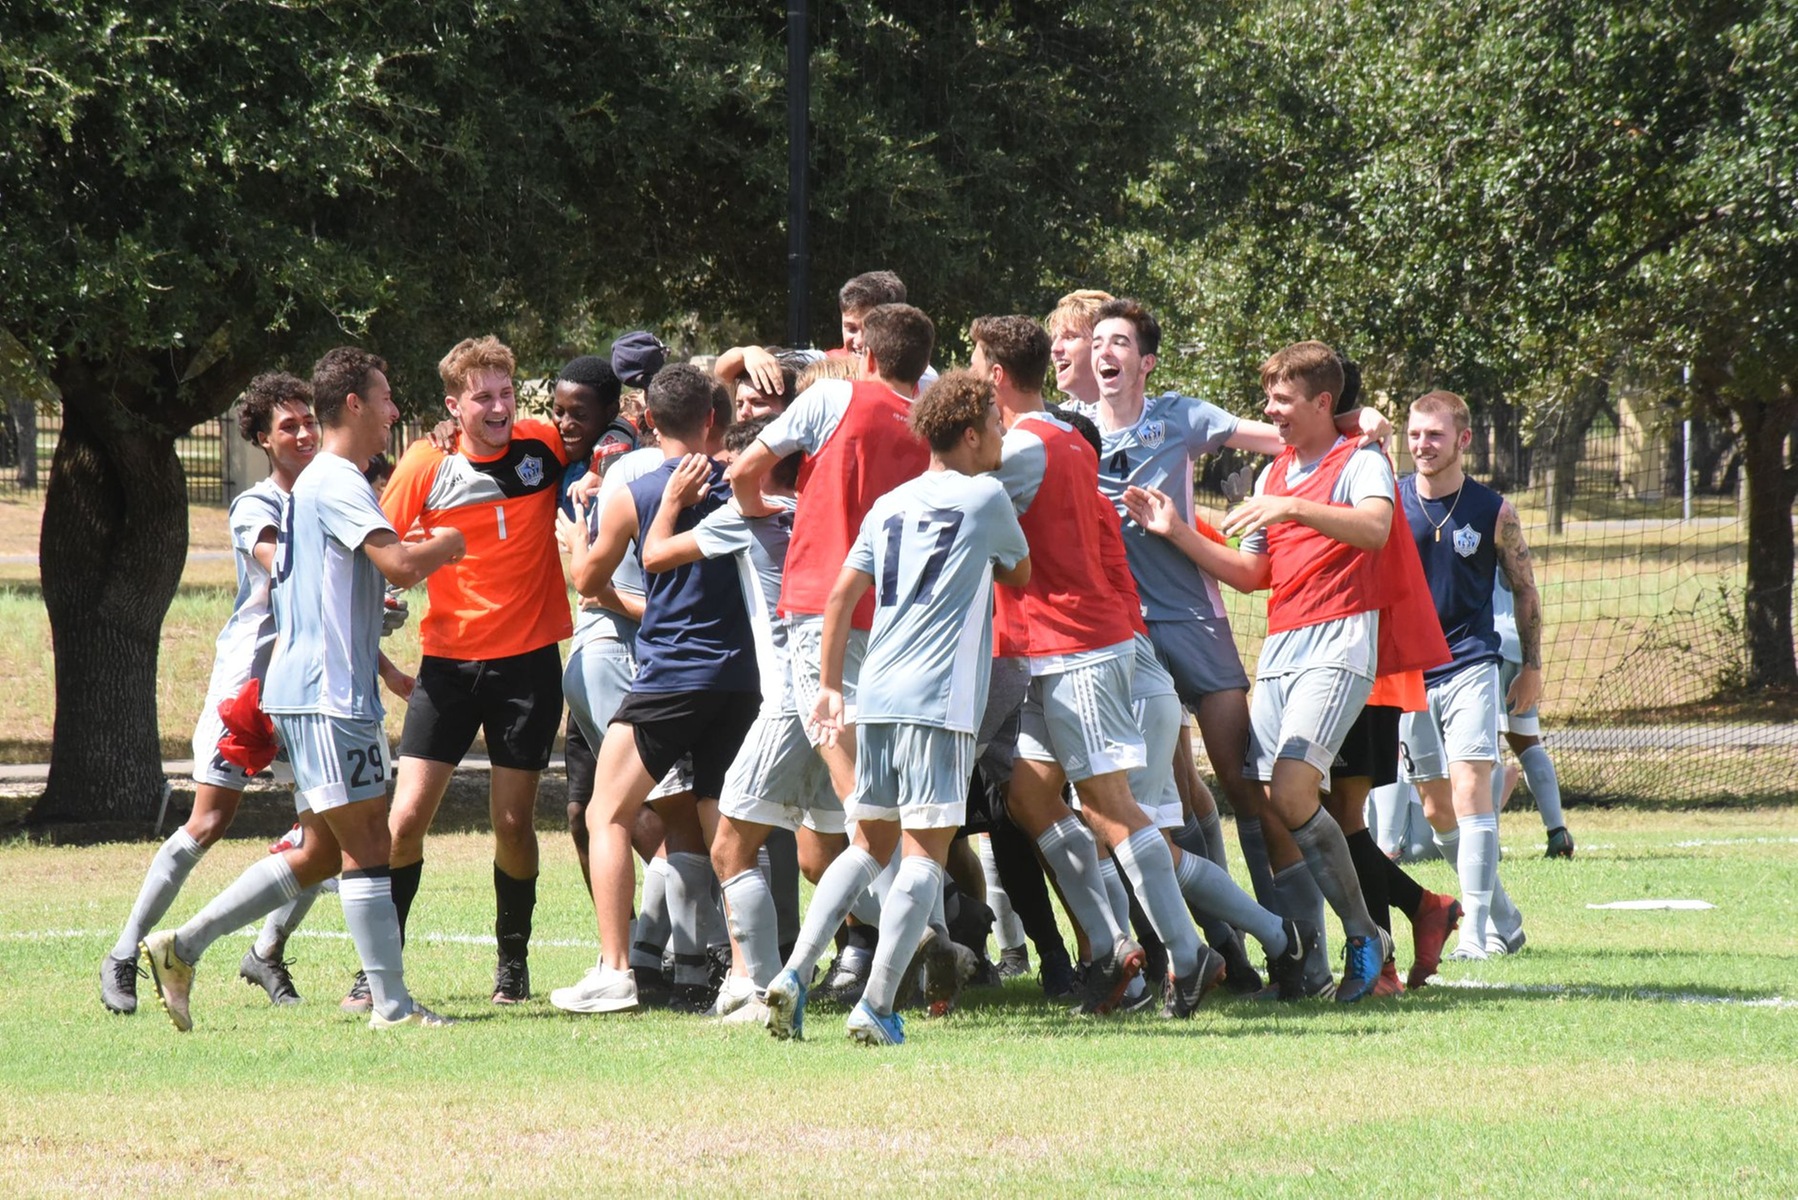 CBC Ties with Blinn; Colchado Scores Game Winning Penalty Kick to Propel Cougars Over Angelina